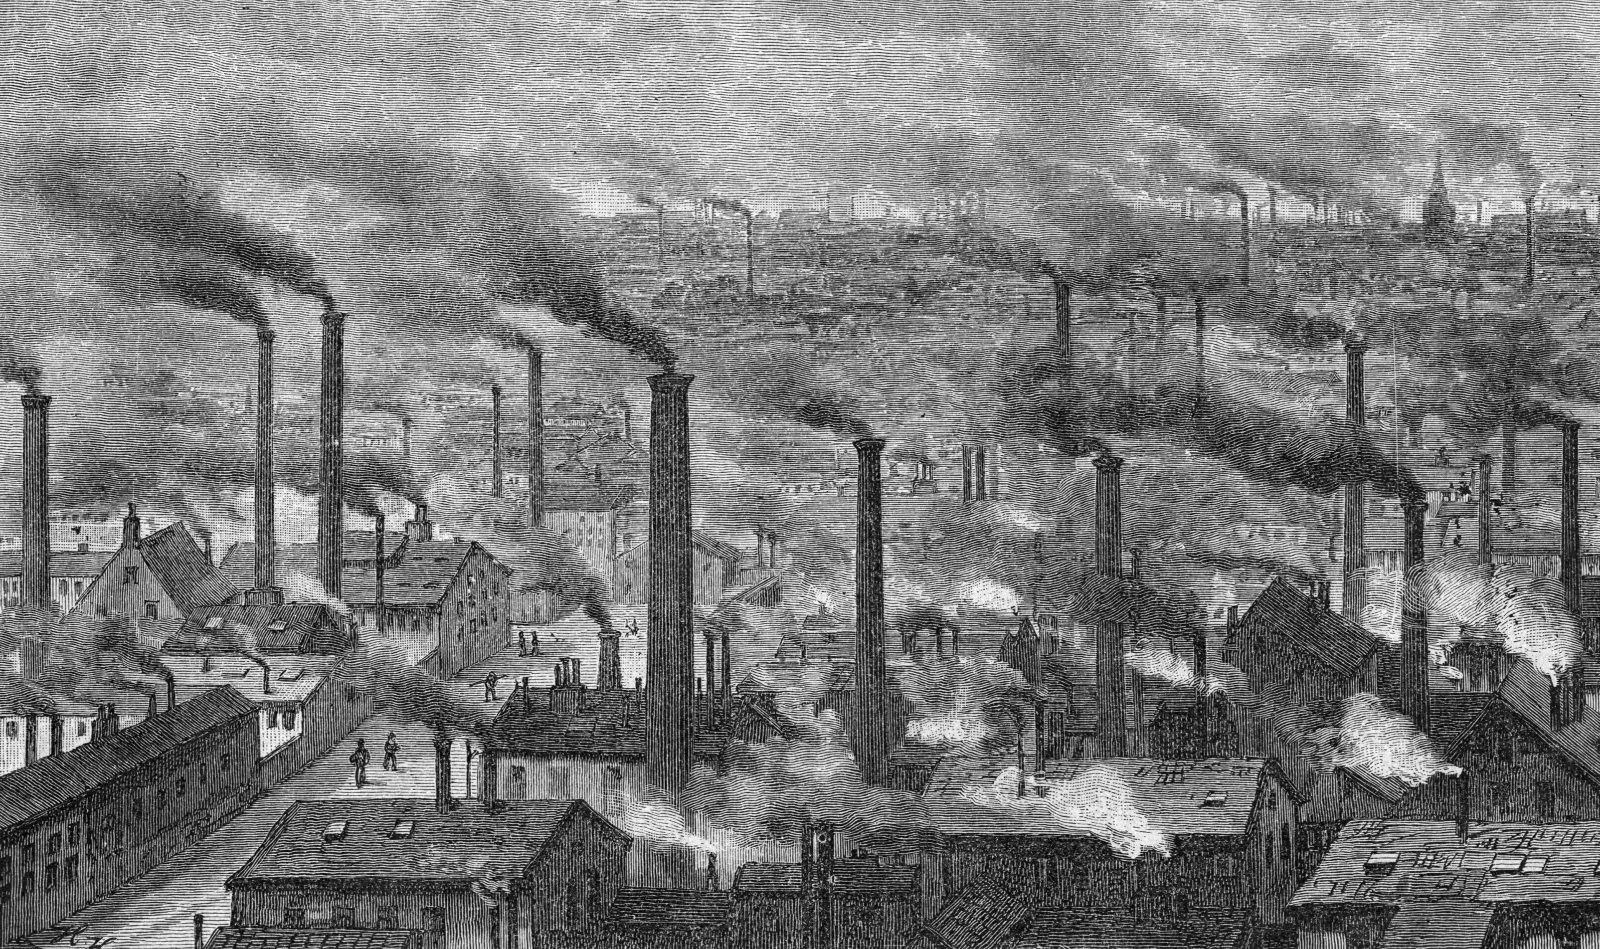 BJW7RA industry, factories, industrial town, England, wood engraving, circa 1880, 1880s, 19th century, historic, historical, chimney, c